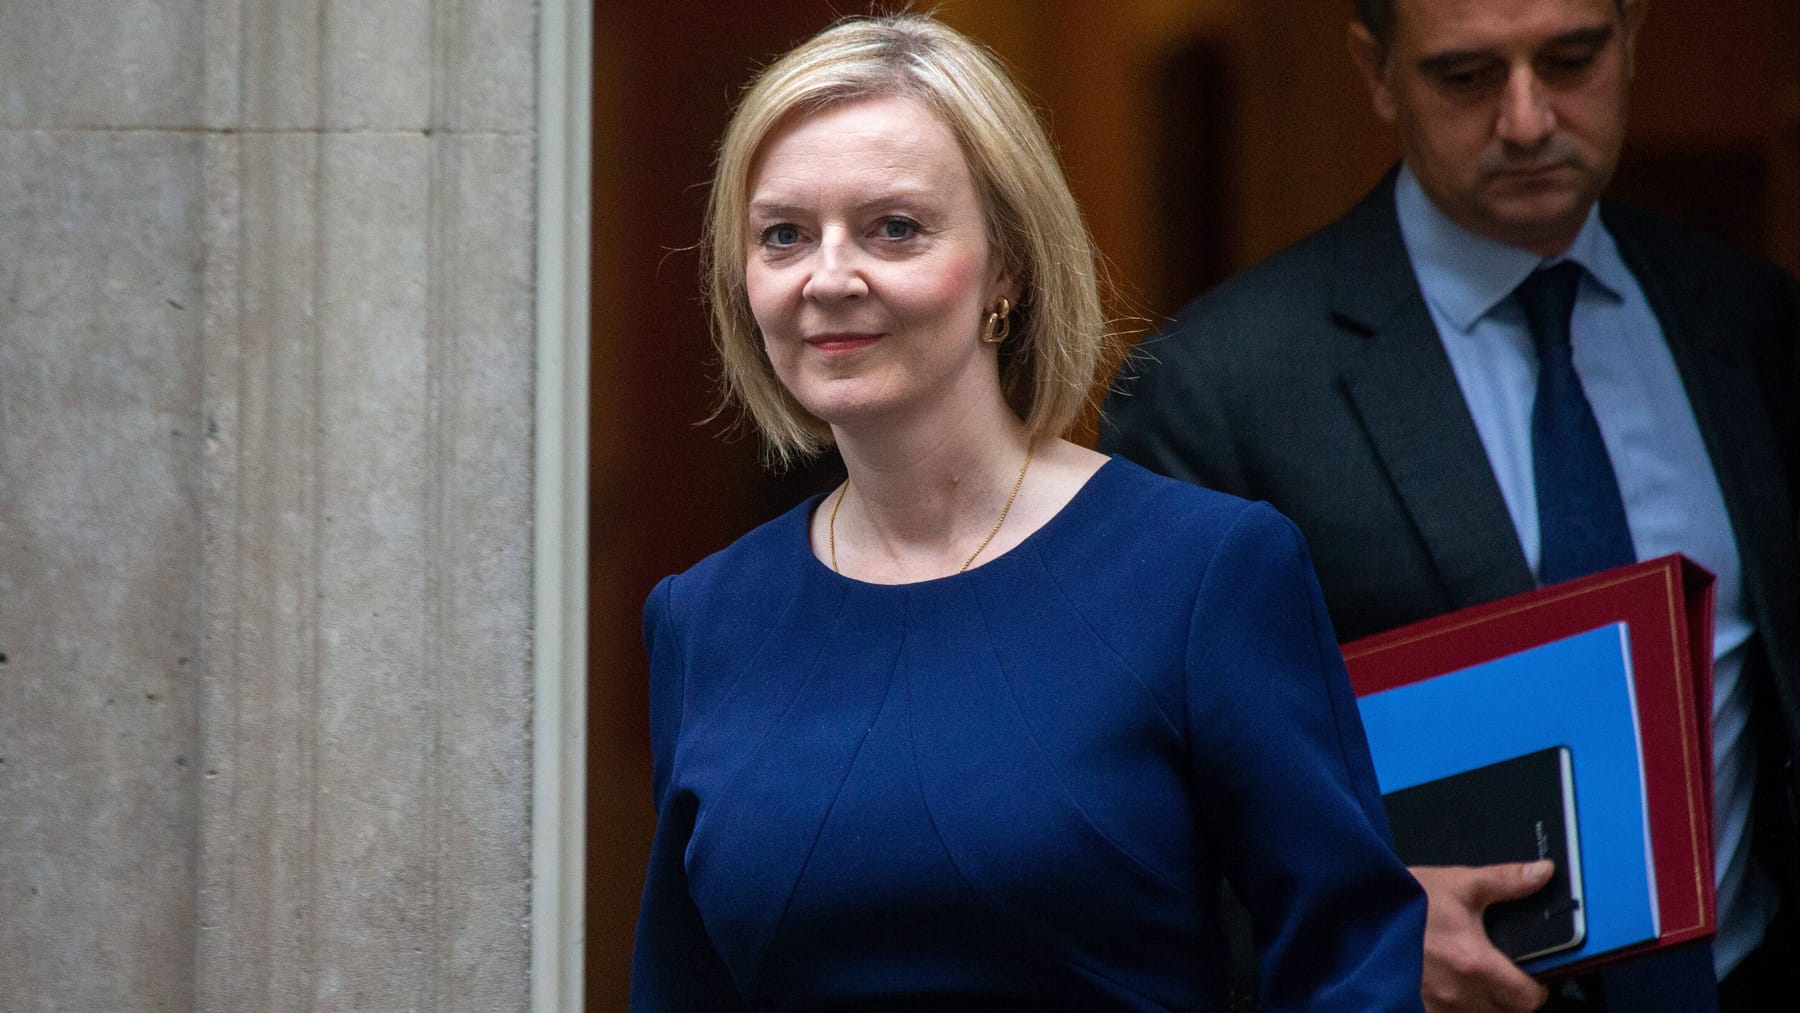 Liz Truss fires the Secretary of State: “serious misconduct”